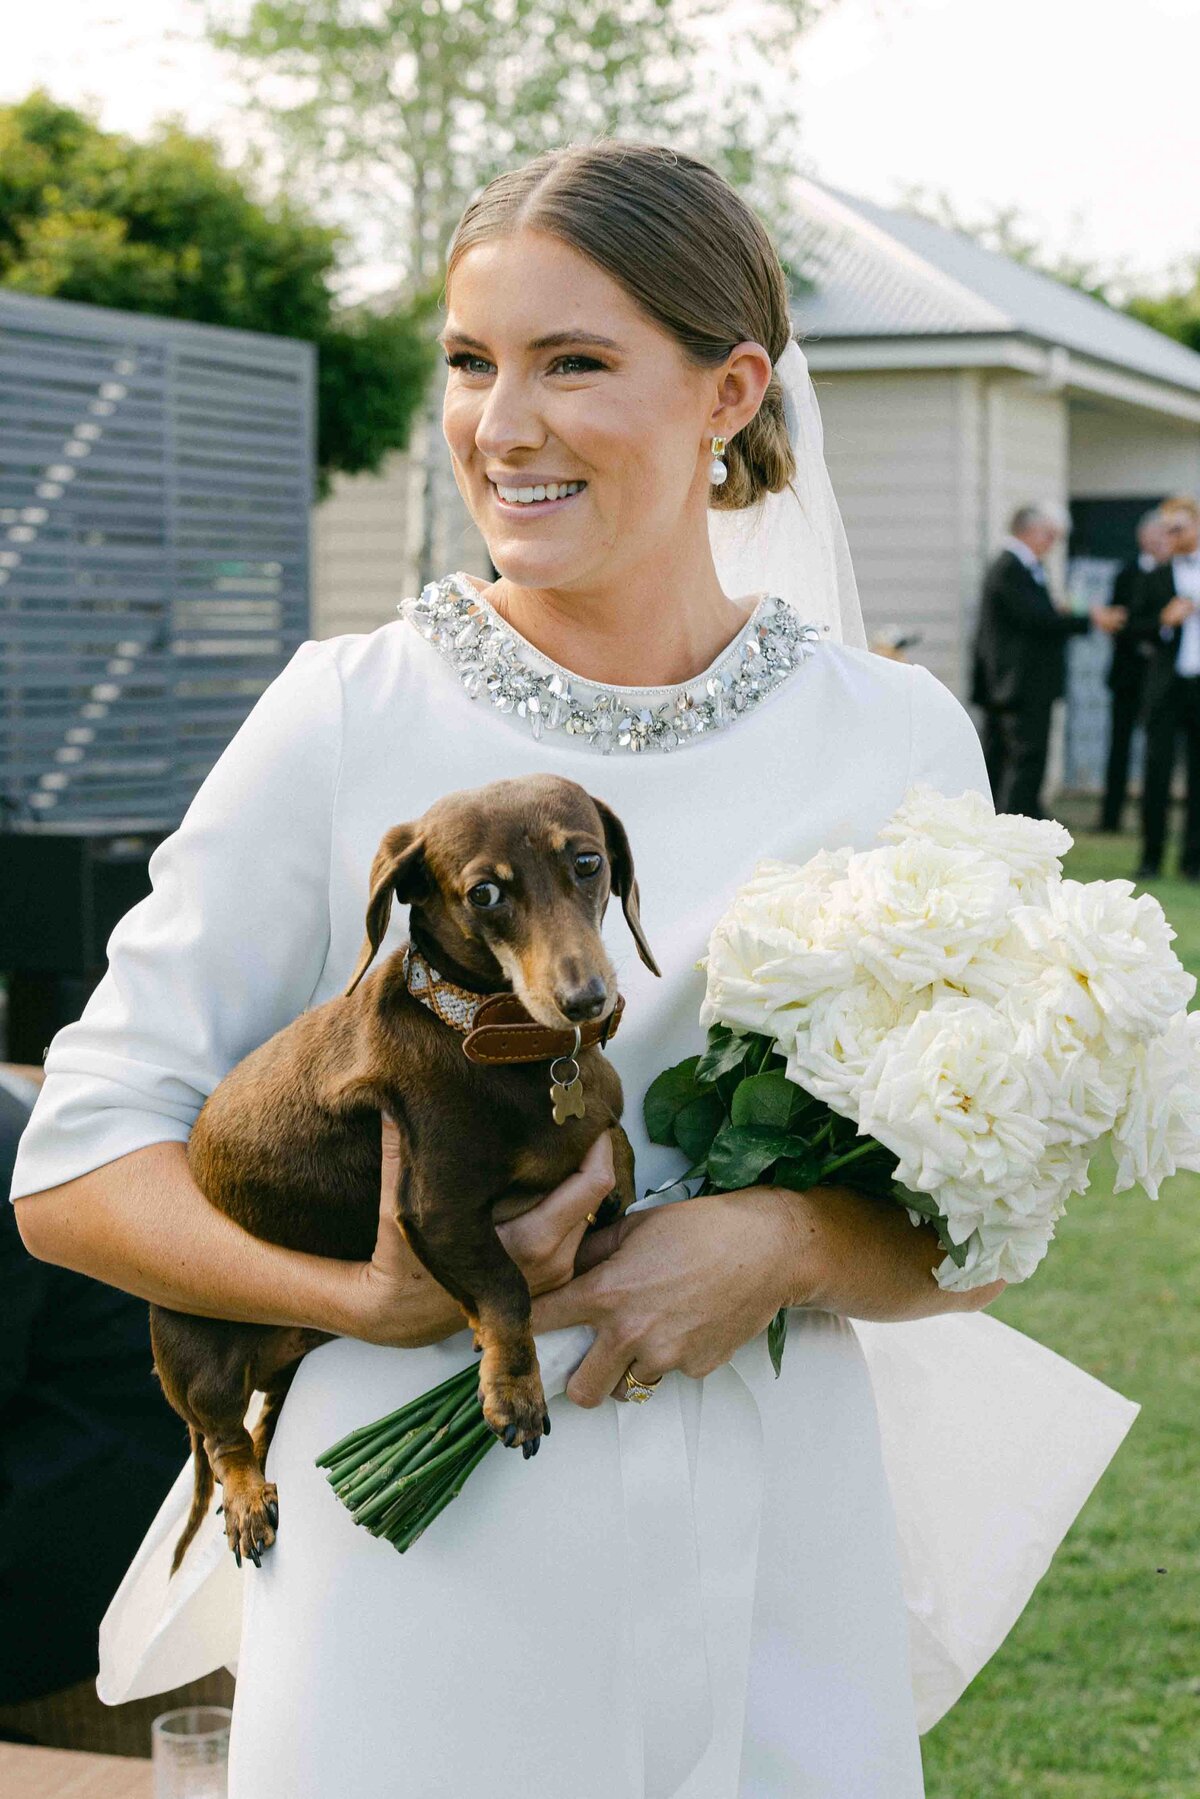 Bride holding her dog and bouquet